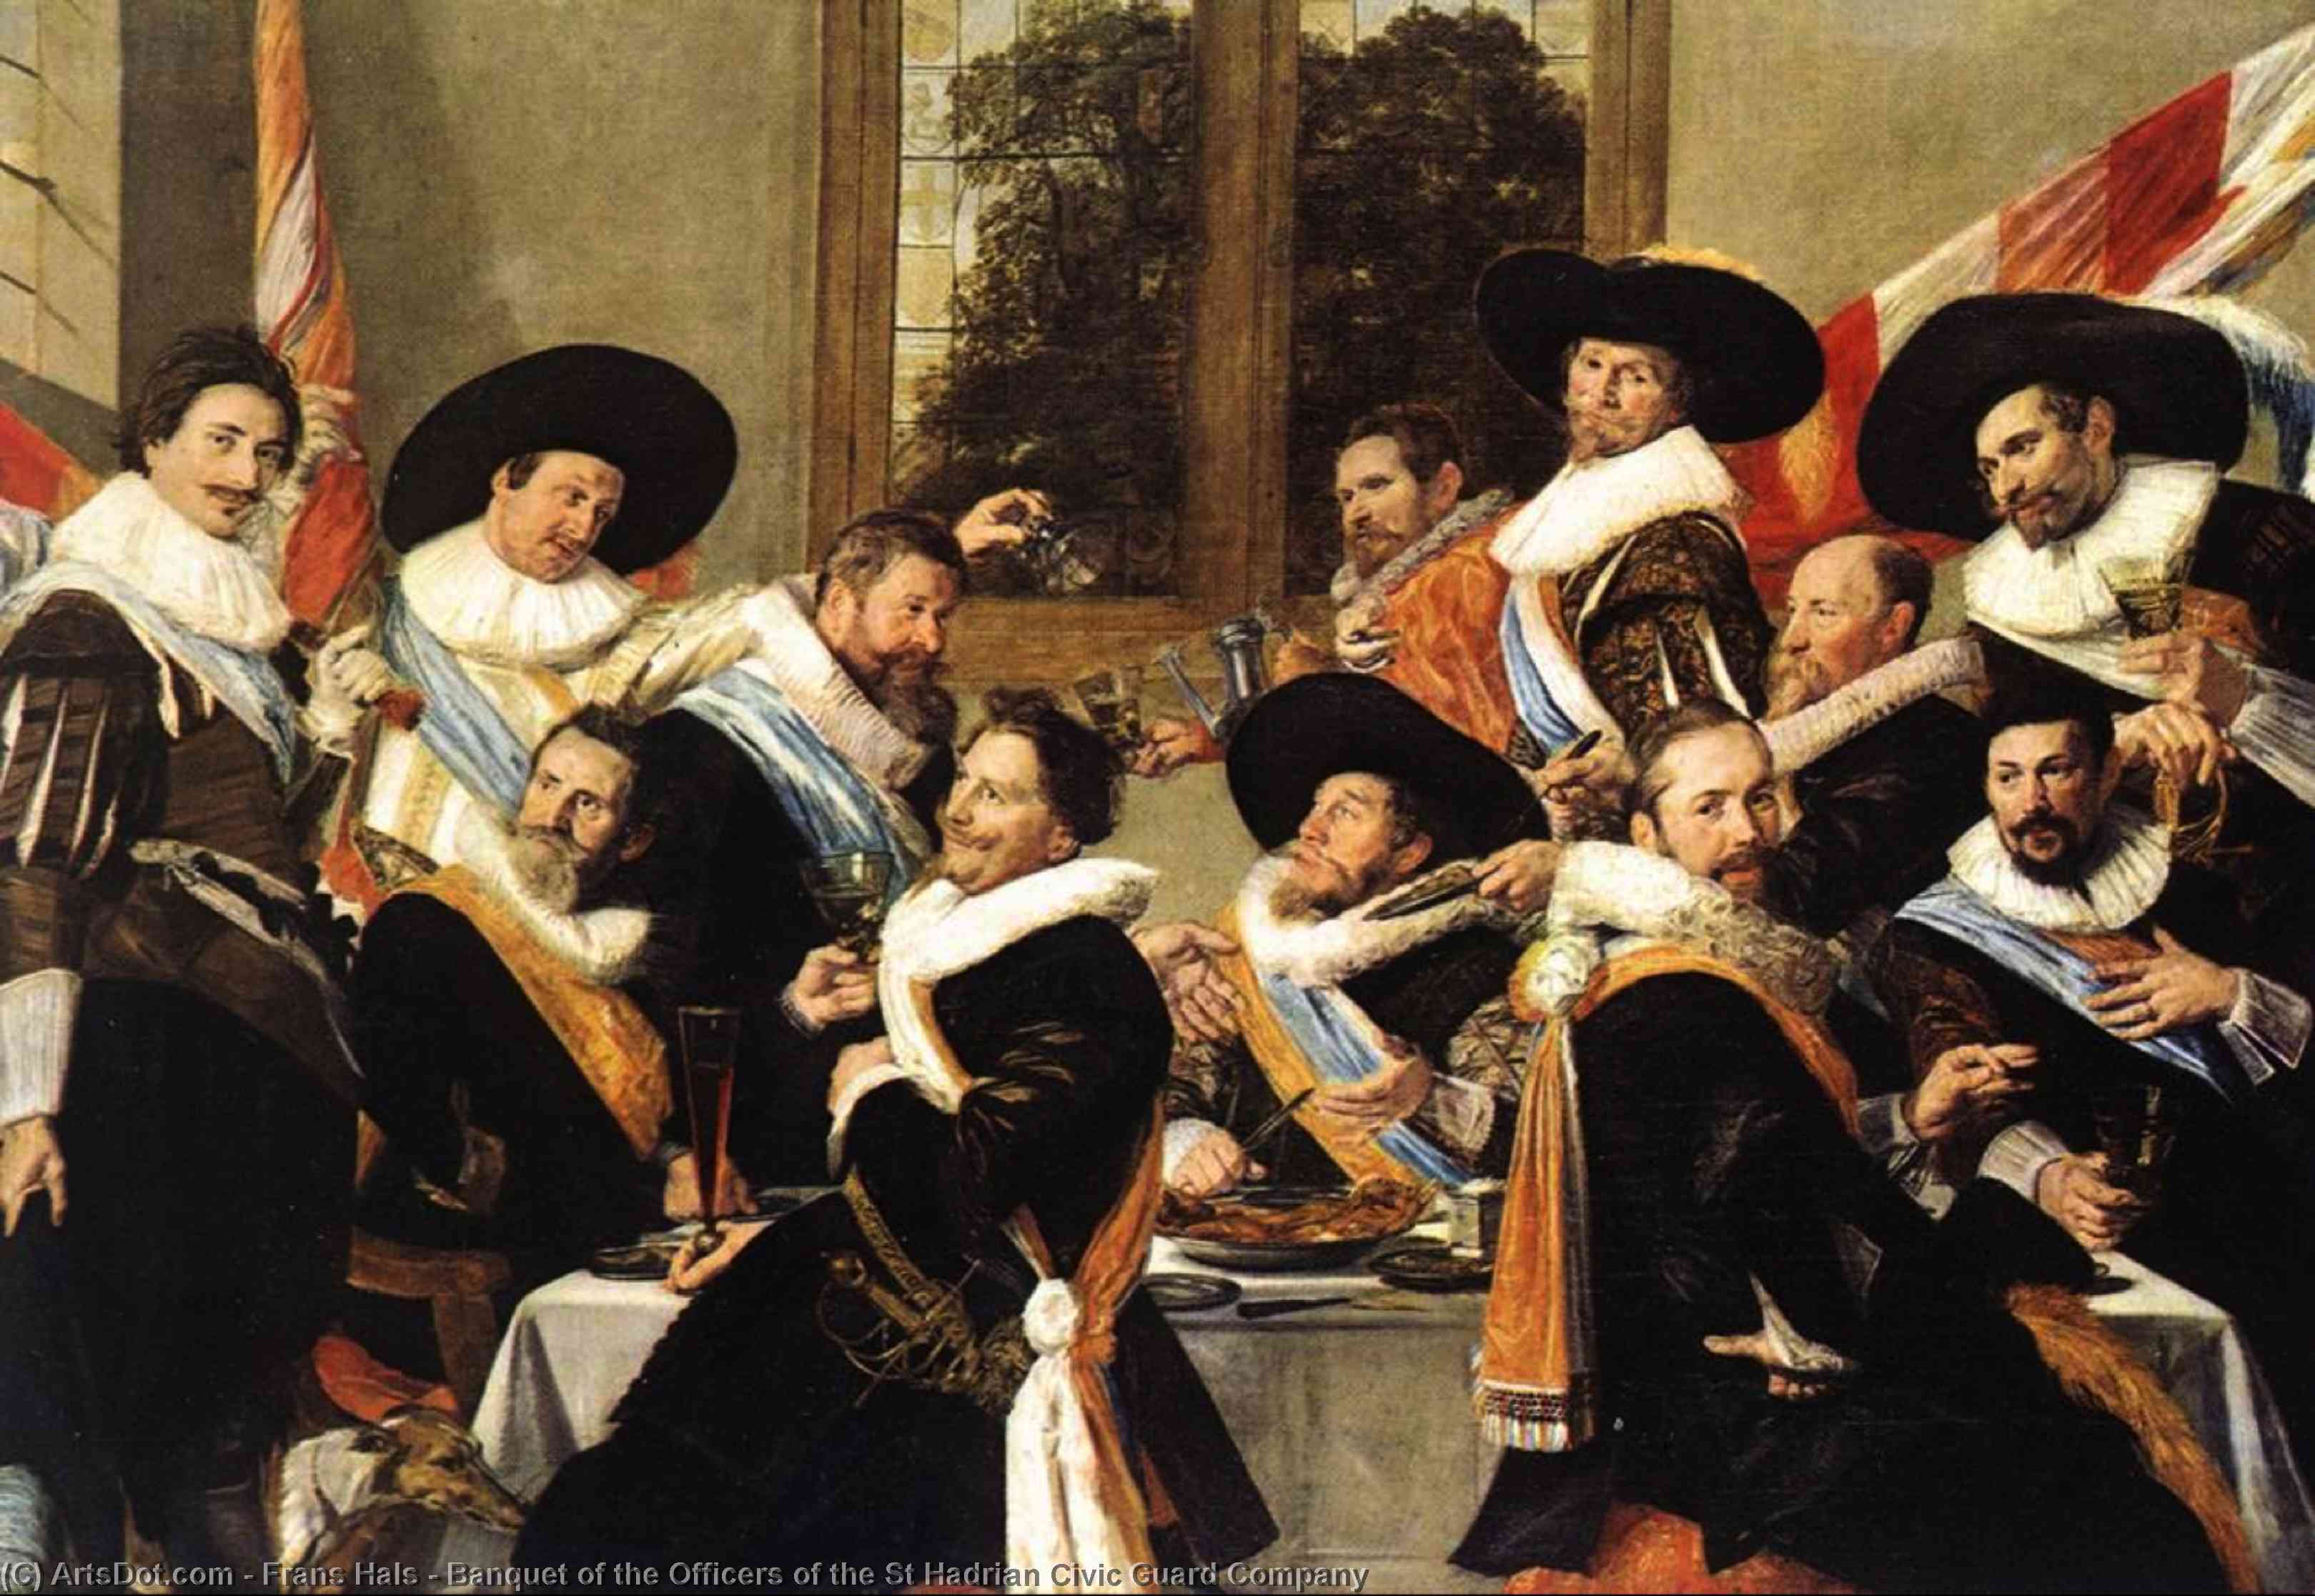 WikiOO.org - Güzel Sanatlar Ansiklopedisi - Resim, Resimler Frans Hals - Banquet of the Officers of the St Hadrian Civic Guard Company